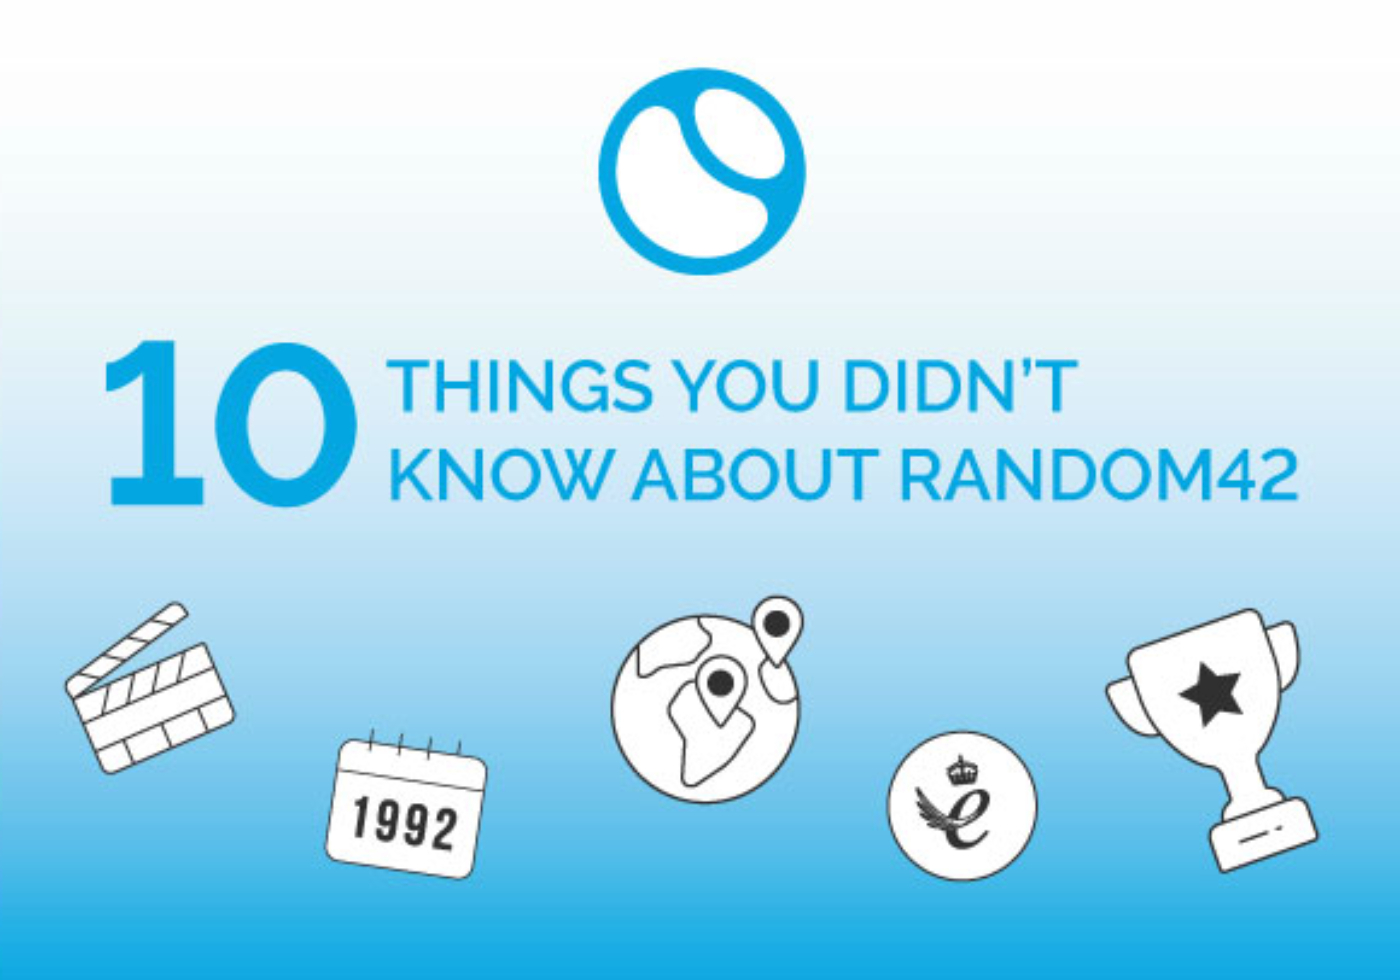 10 Things You Didn't Know About Random42